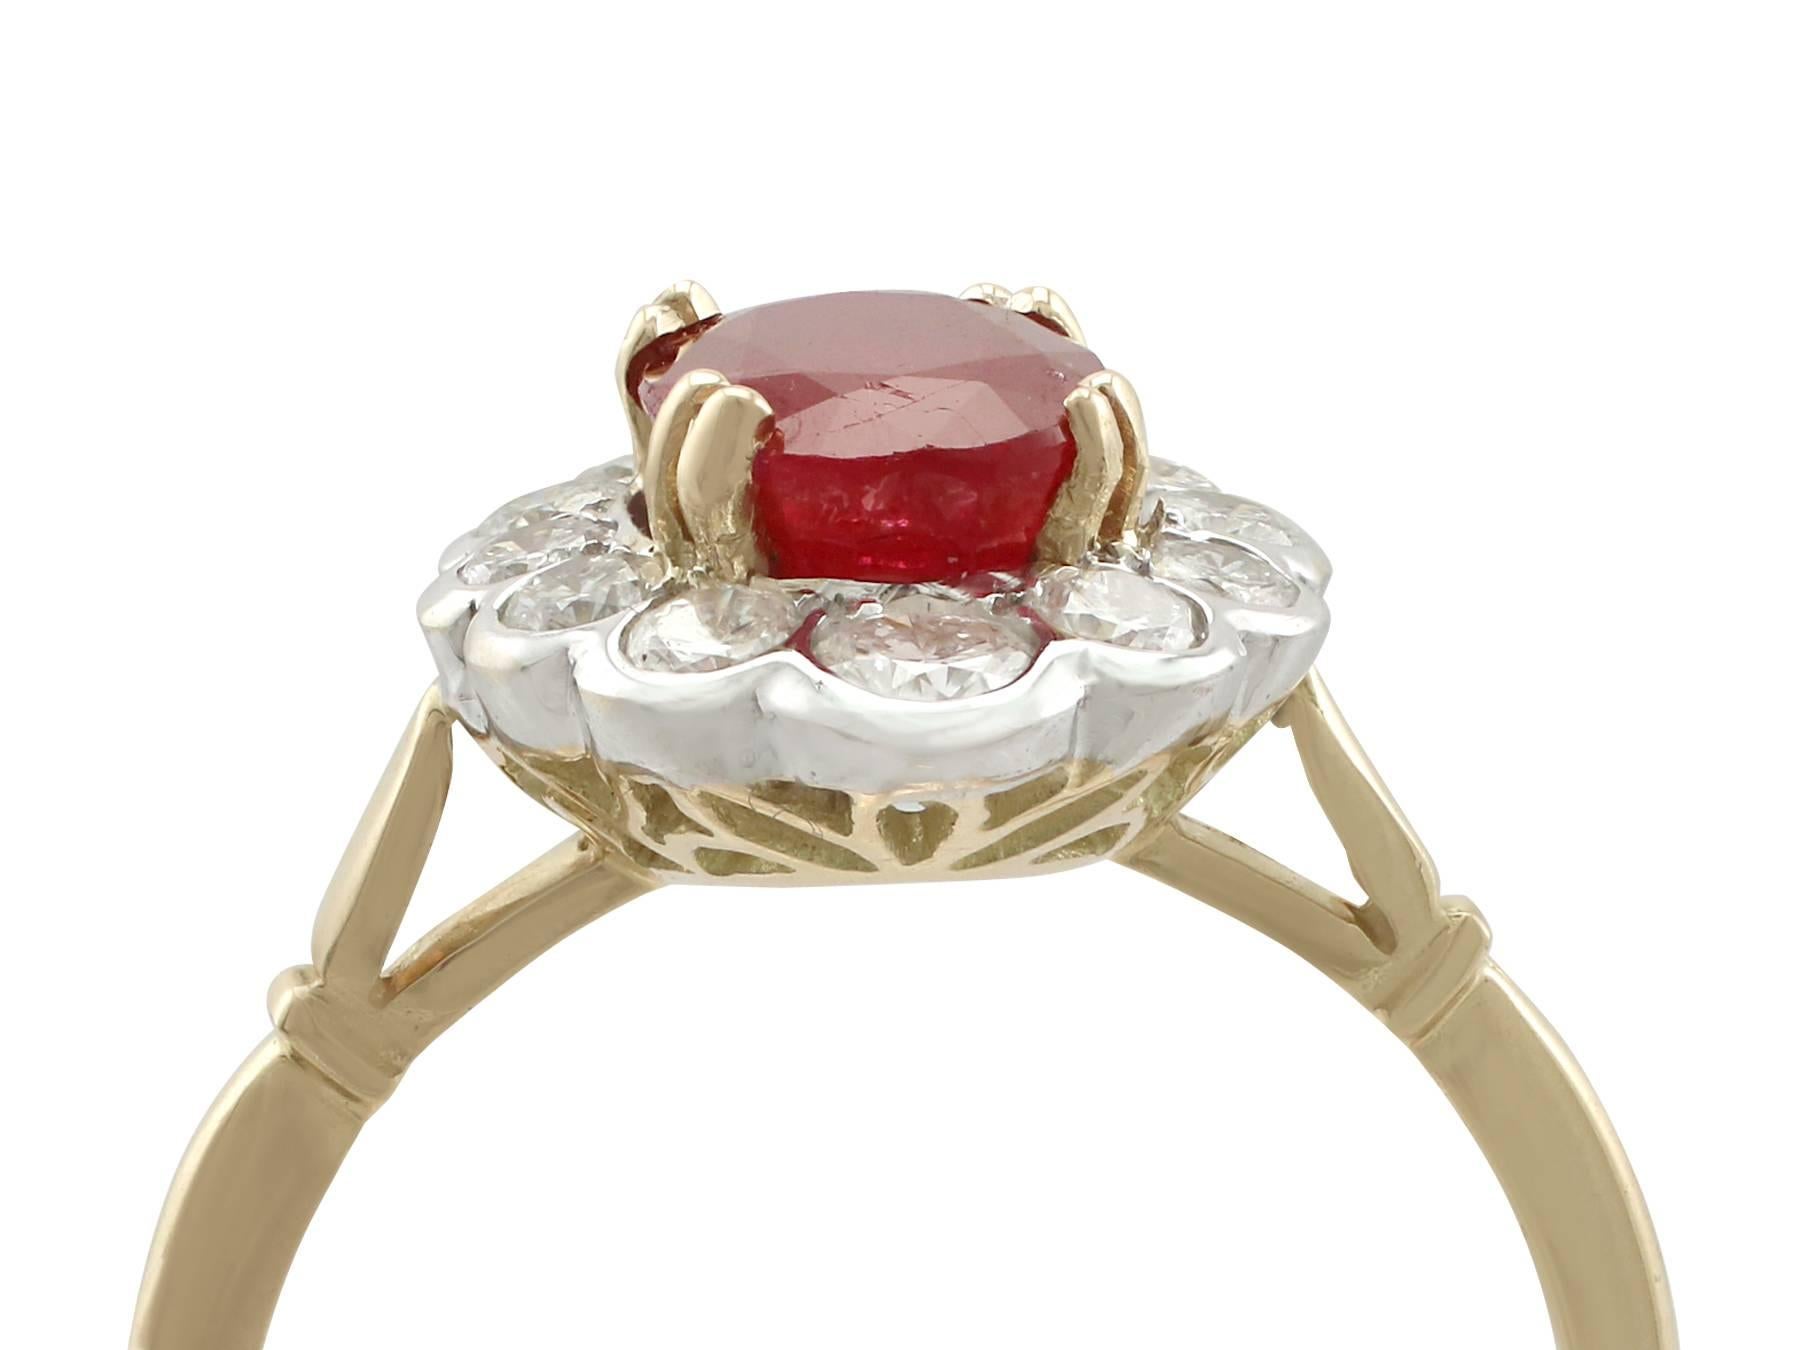 An impressive 2.17 carat ruby and 0.56 carat diamond, 18 carat yellow gold and 18 carat white gold set dress ring; part of our diverse vintage jewellery collections.

This fine and impressive ruby and diamond ring has been crafted in 18 ct yellow